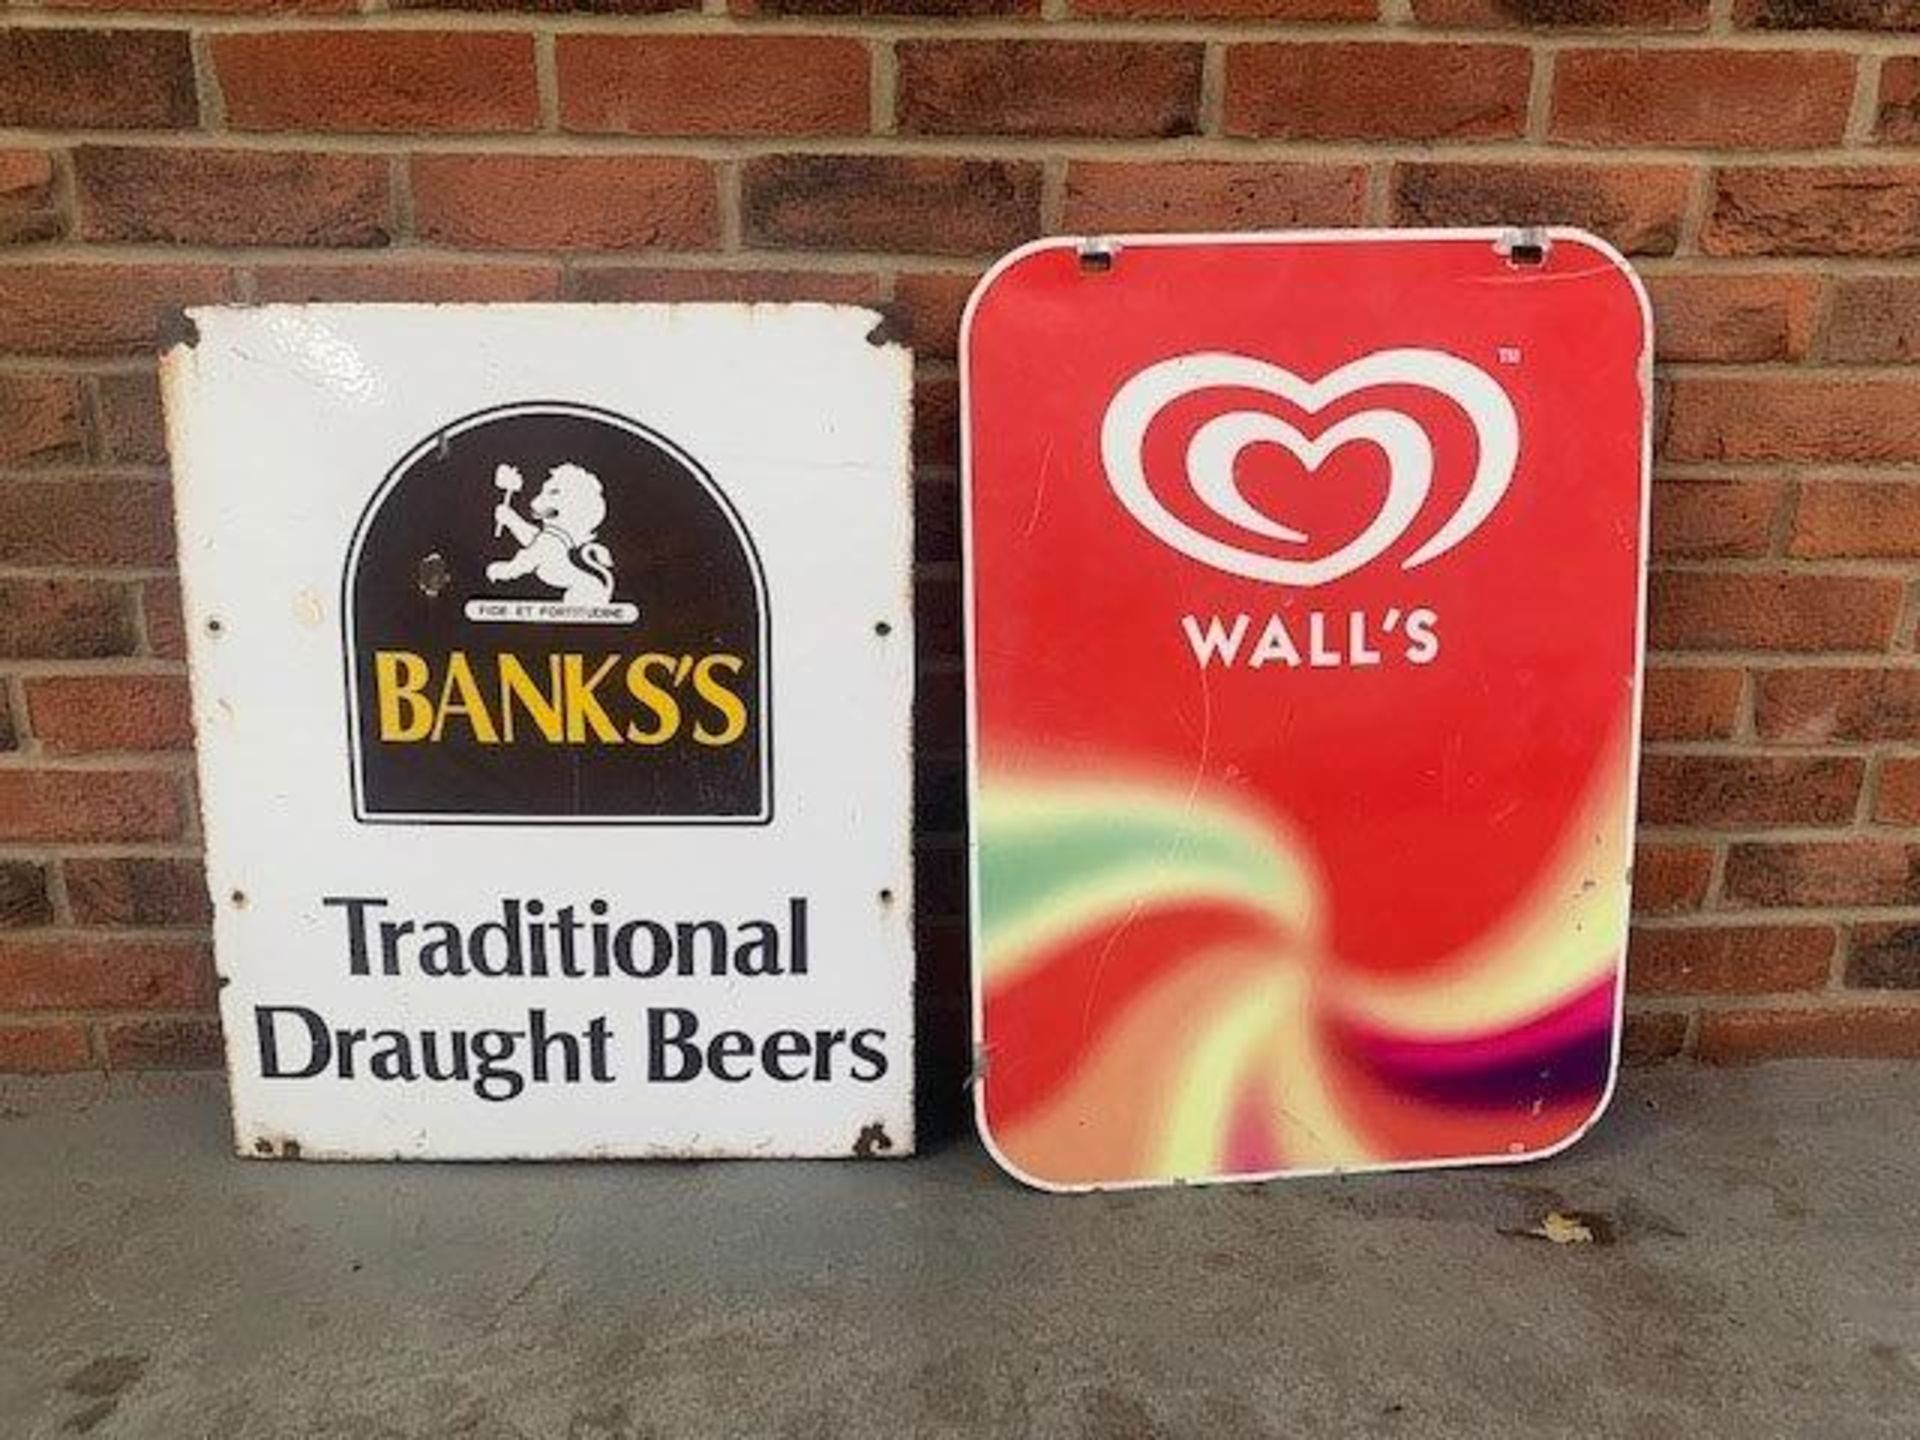 Banks's Traditional draft beers vintage sign and a Wall's ice cream sign